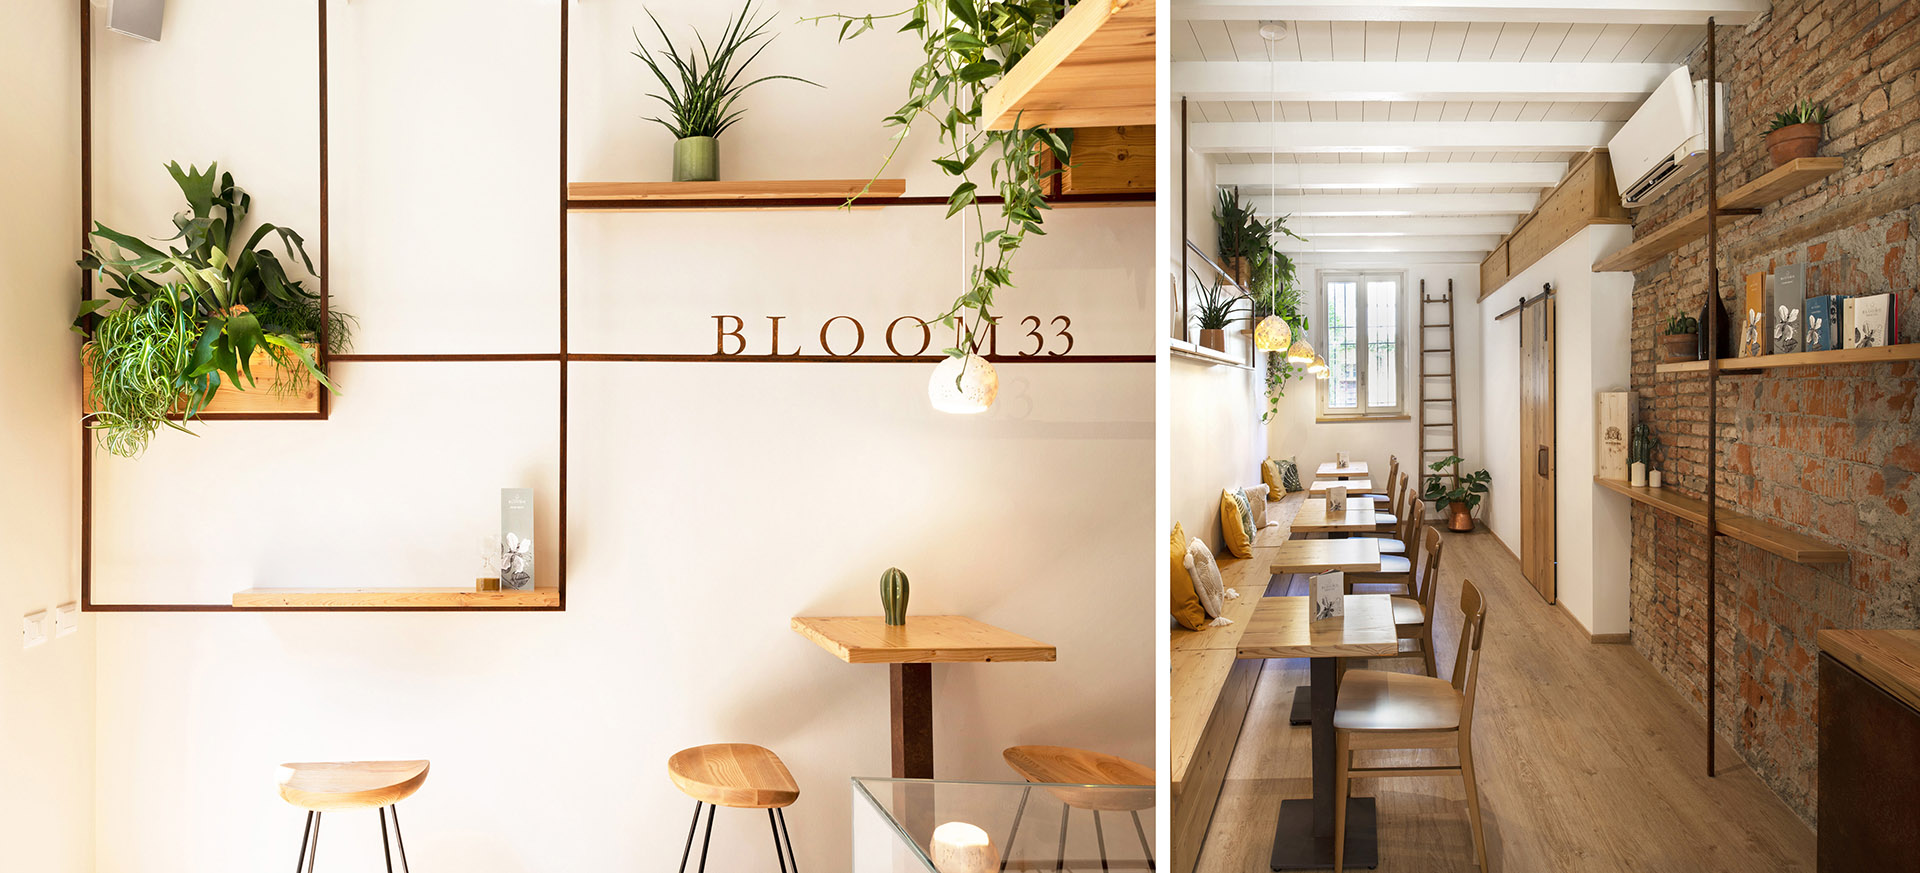 Design with sleek lines and a natural moodboard for Bloom 33 Botanic Bar in via Mazzini in Crema